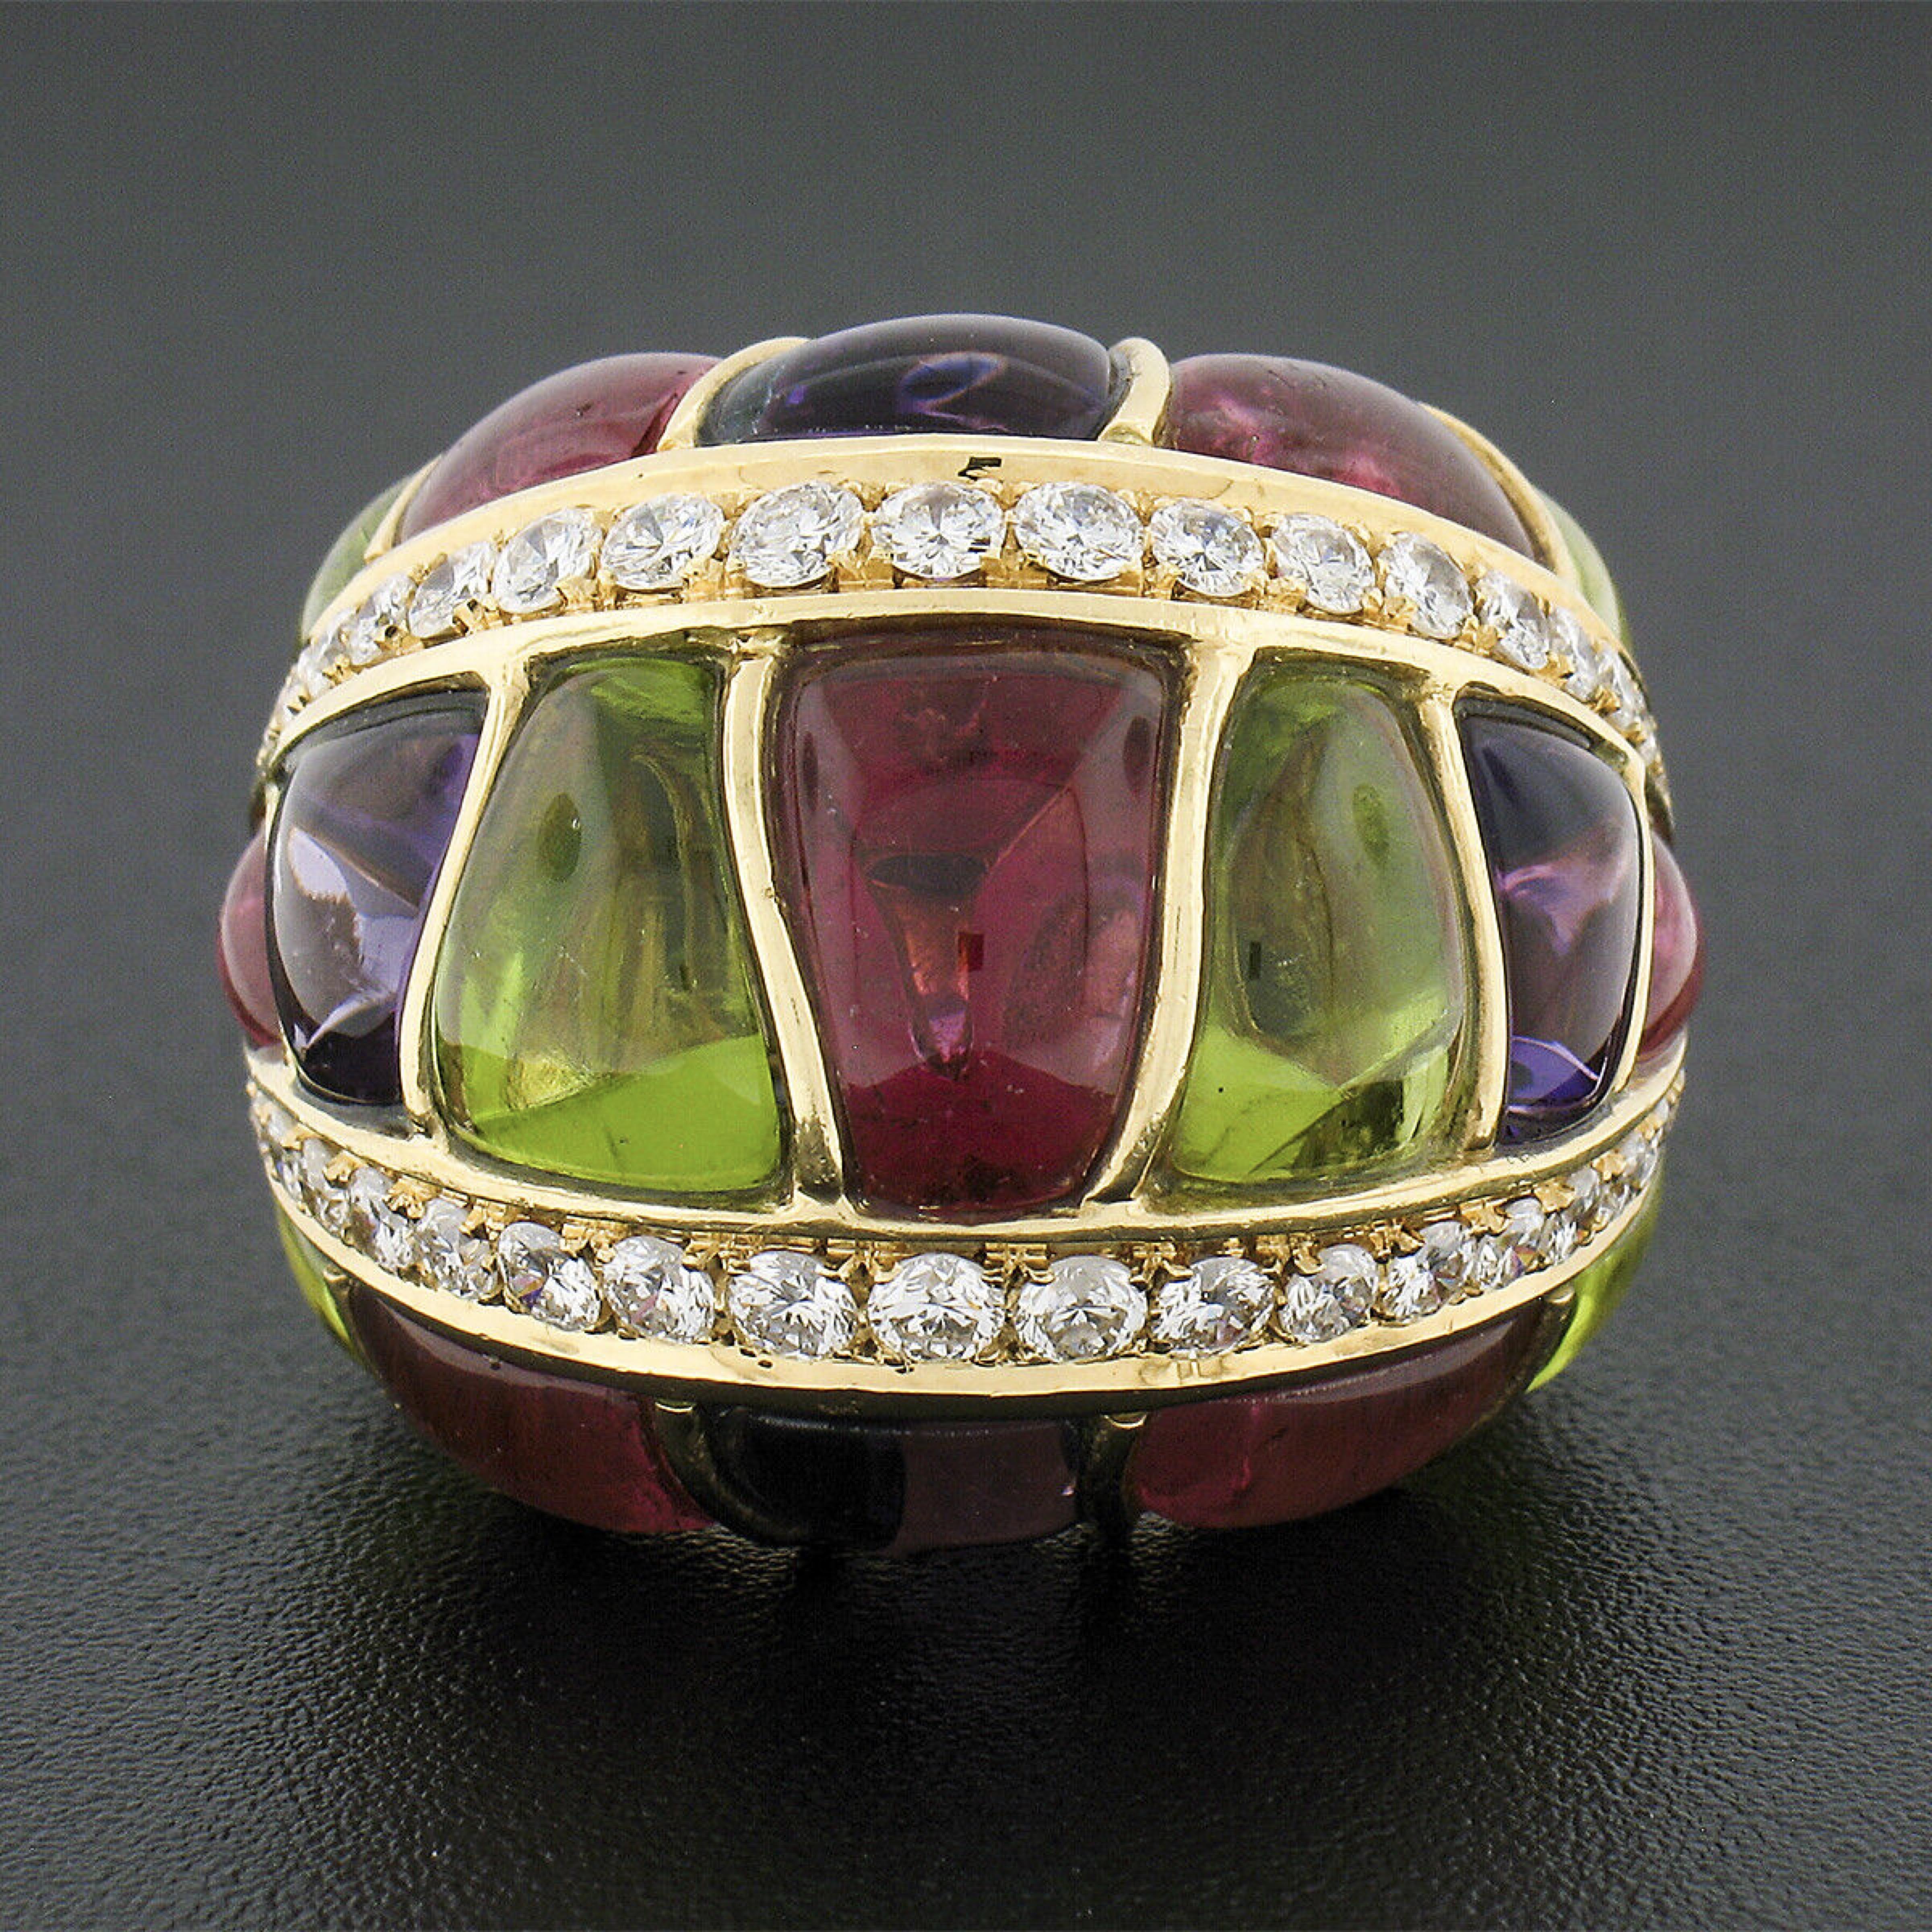 Here we have an absolutely magnificent and very well made cocktail ring that was crafted in Italy from solid 18k yellow gold and designed by Roberto Casarin. It features a domed top that is set with the most gorgeous natural peridot, amethyst, and